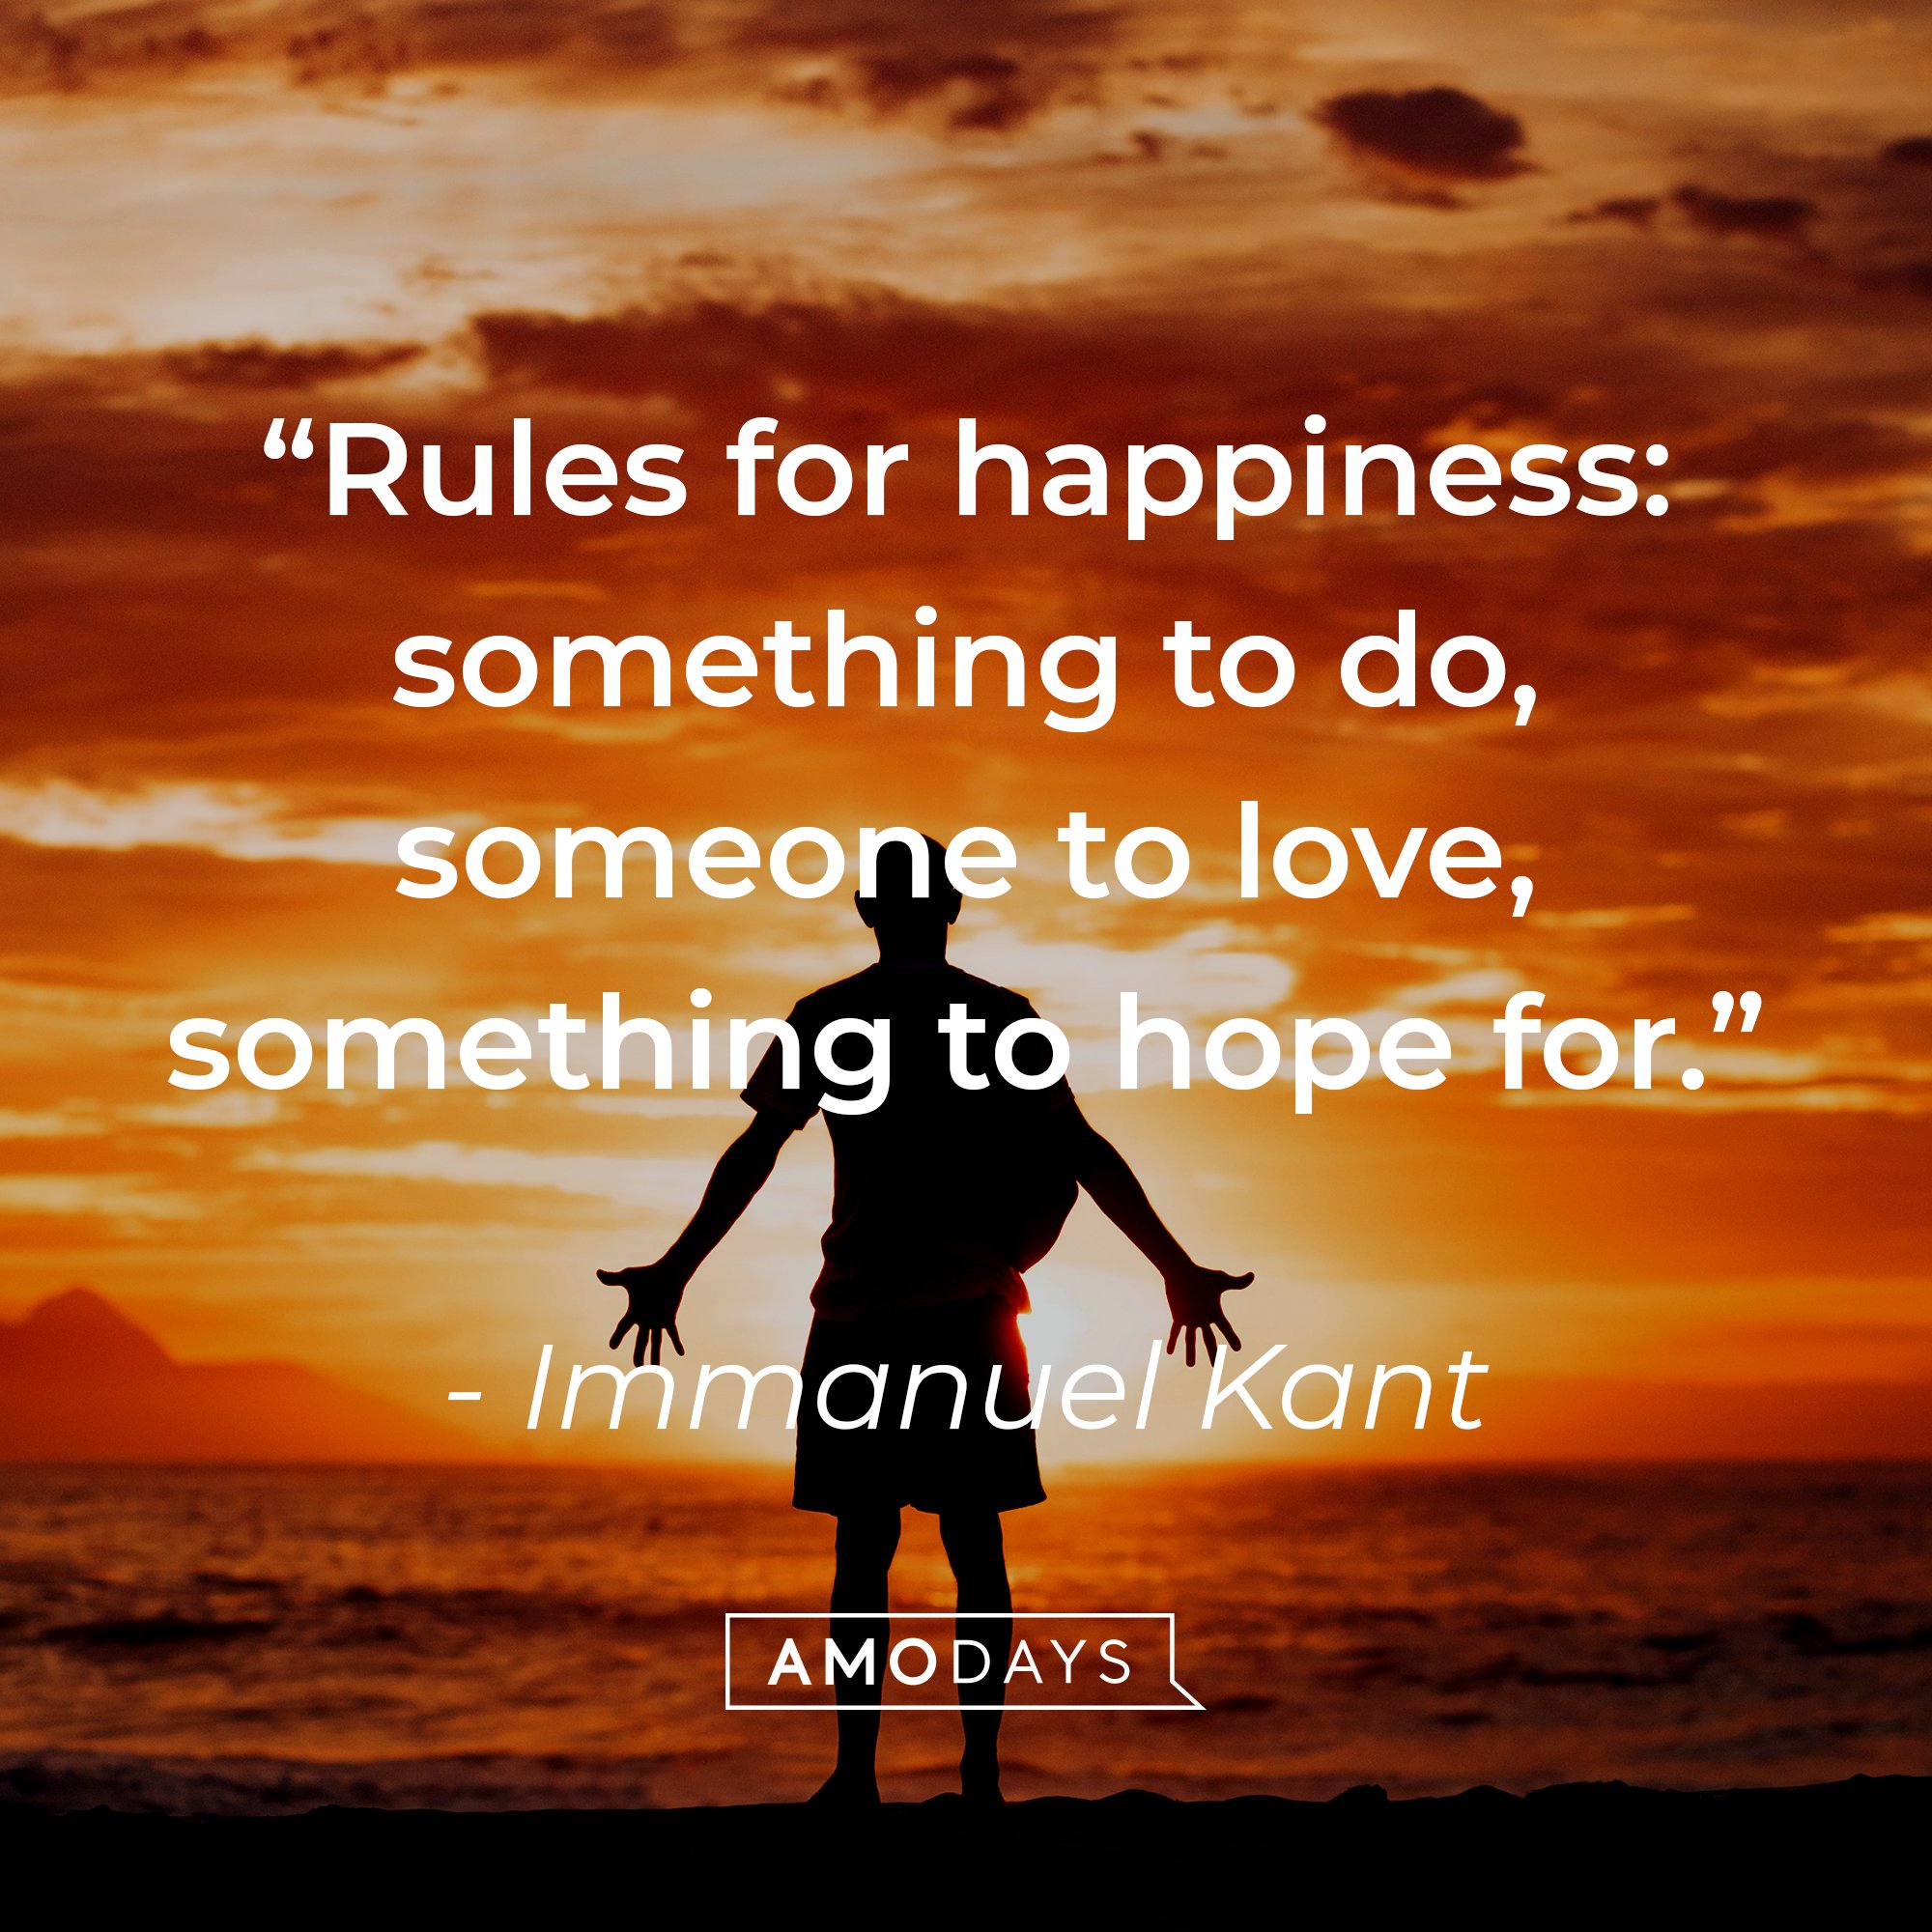 Immanuel Kant’s quote: “Rules for happiness: something to do, someone to love, something to hope for.” | Image: Amodays